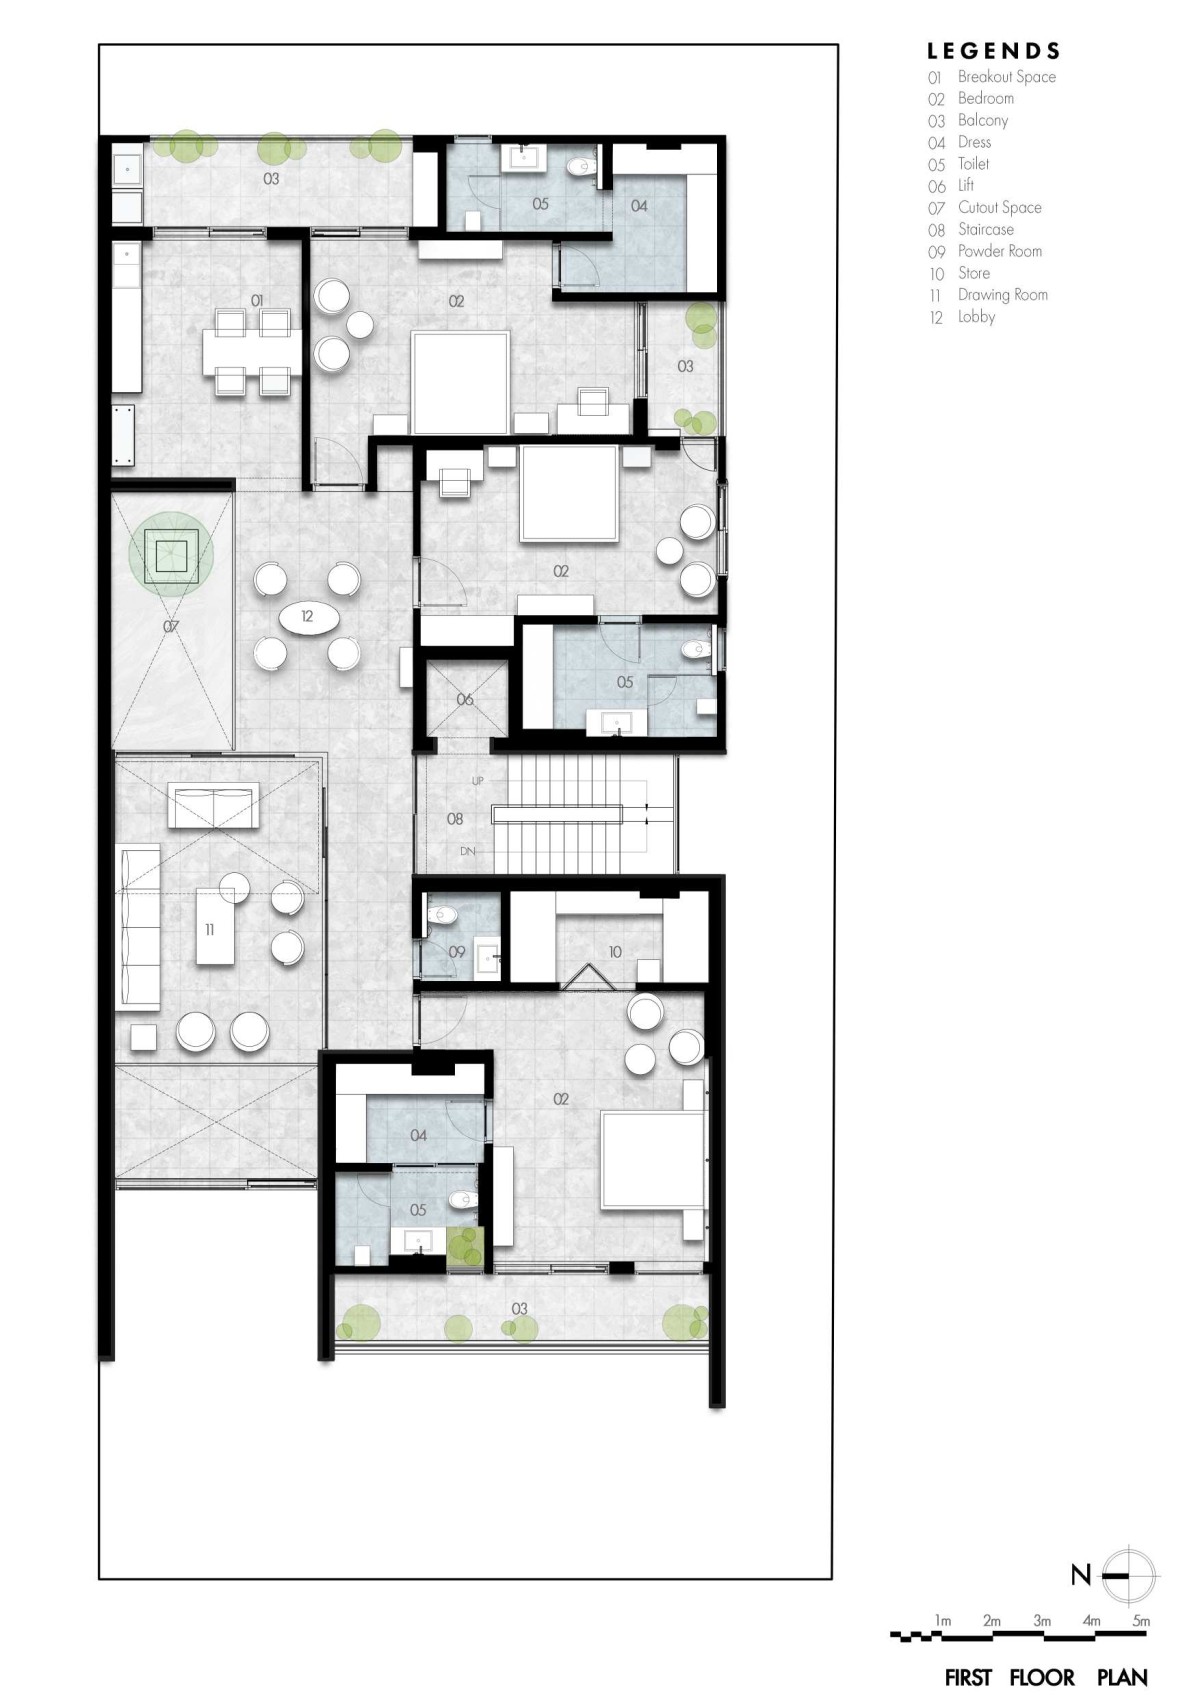 First floor plan of Swatantra Residence by Spaces Architects@ka